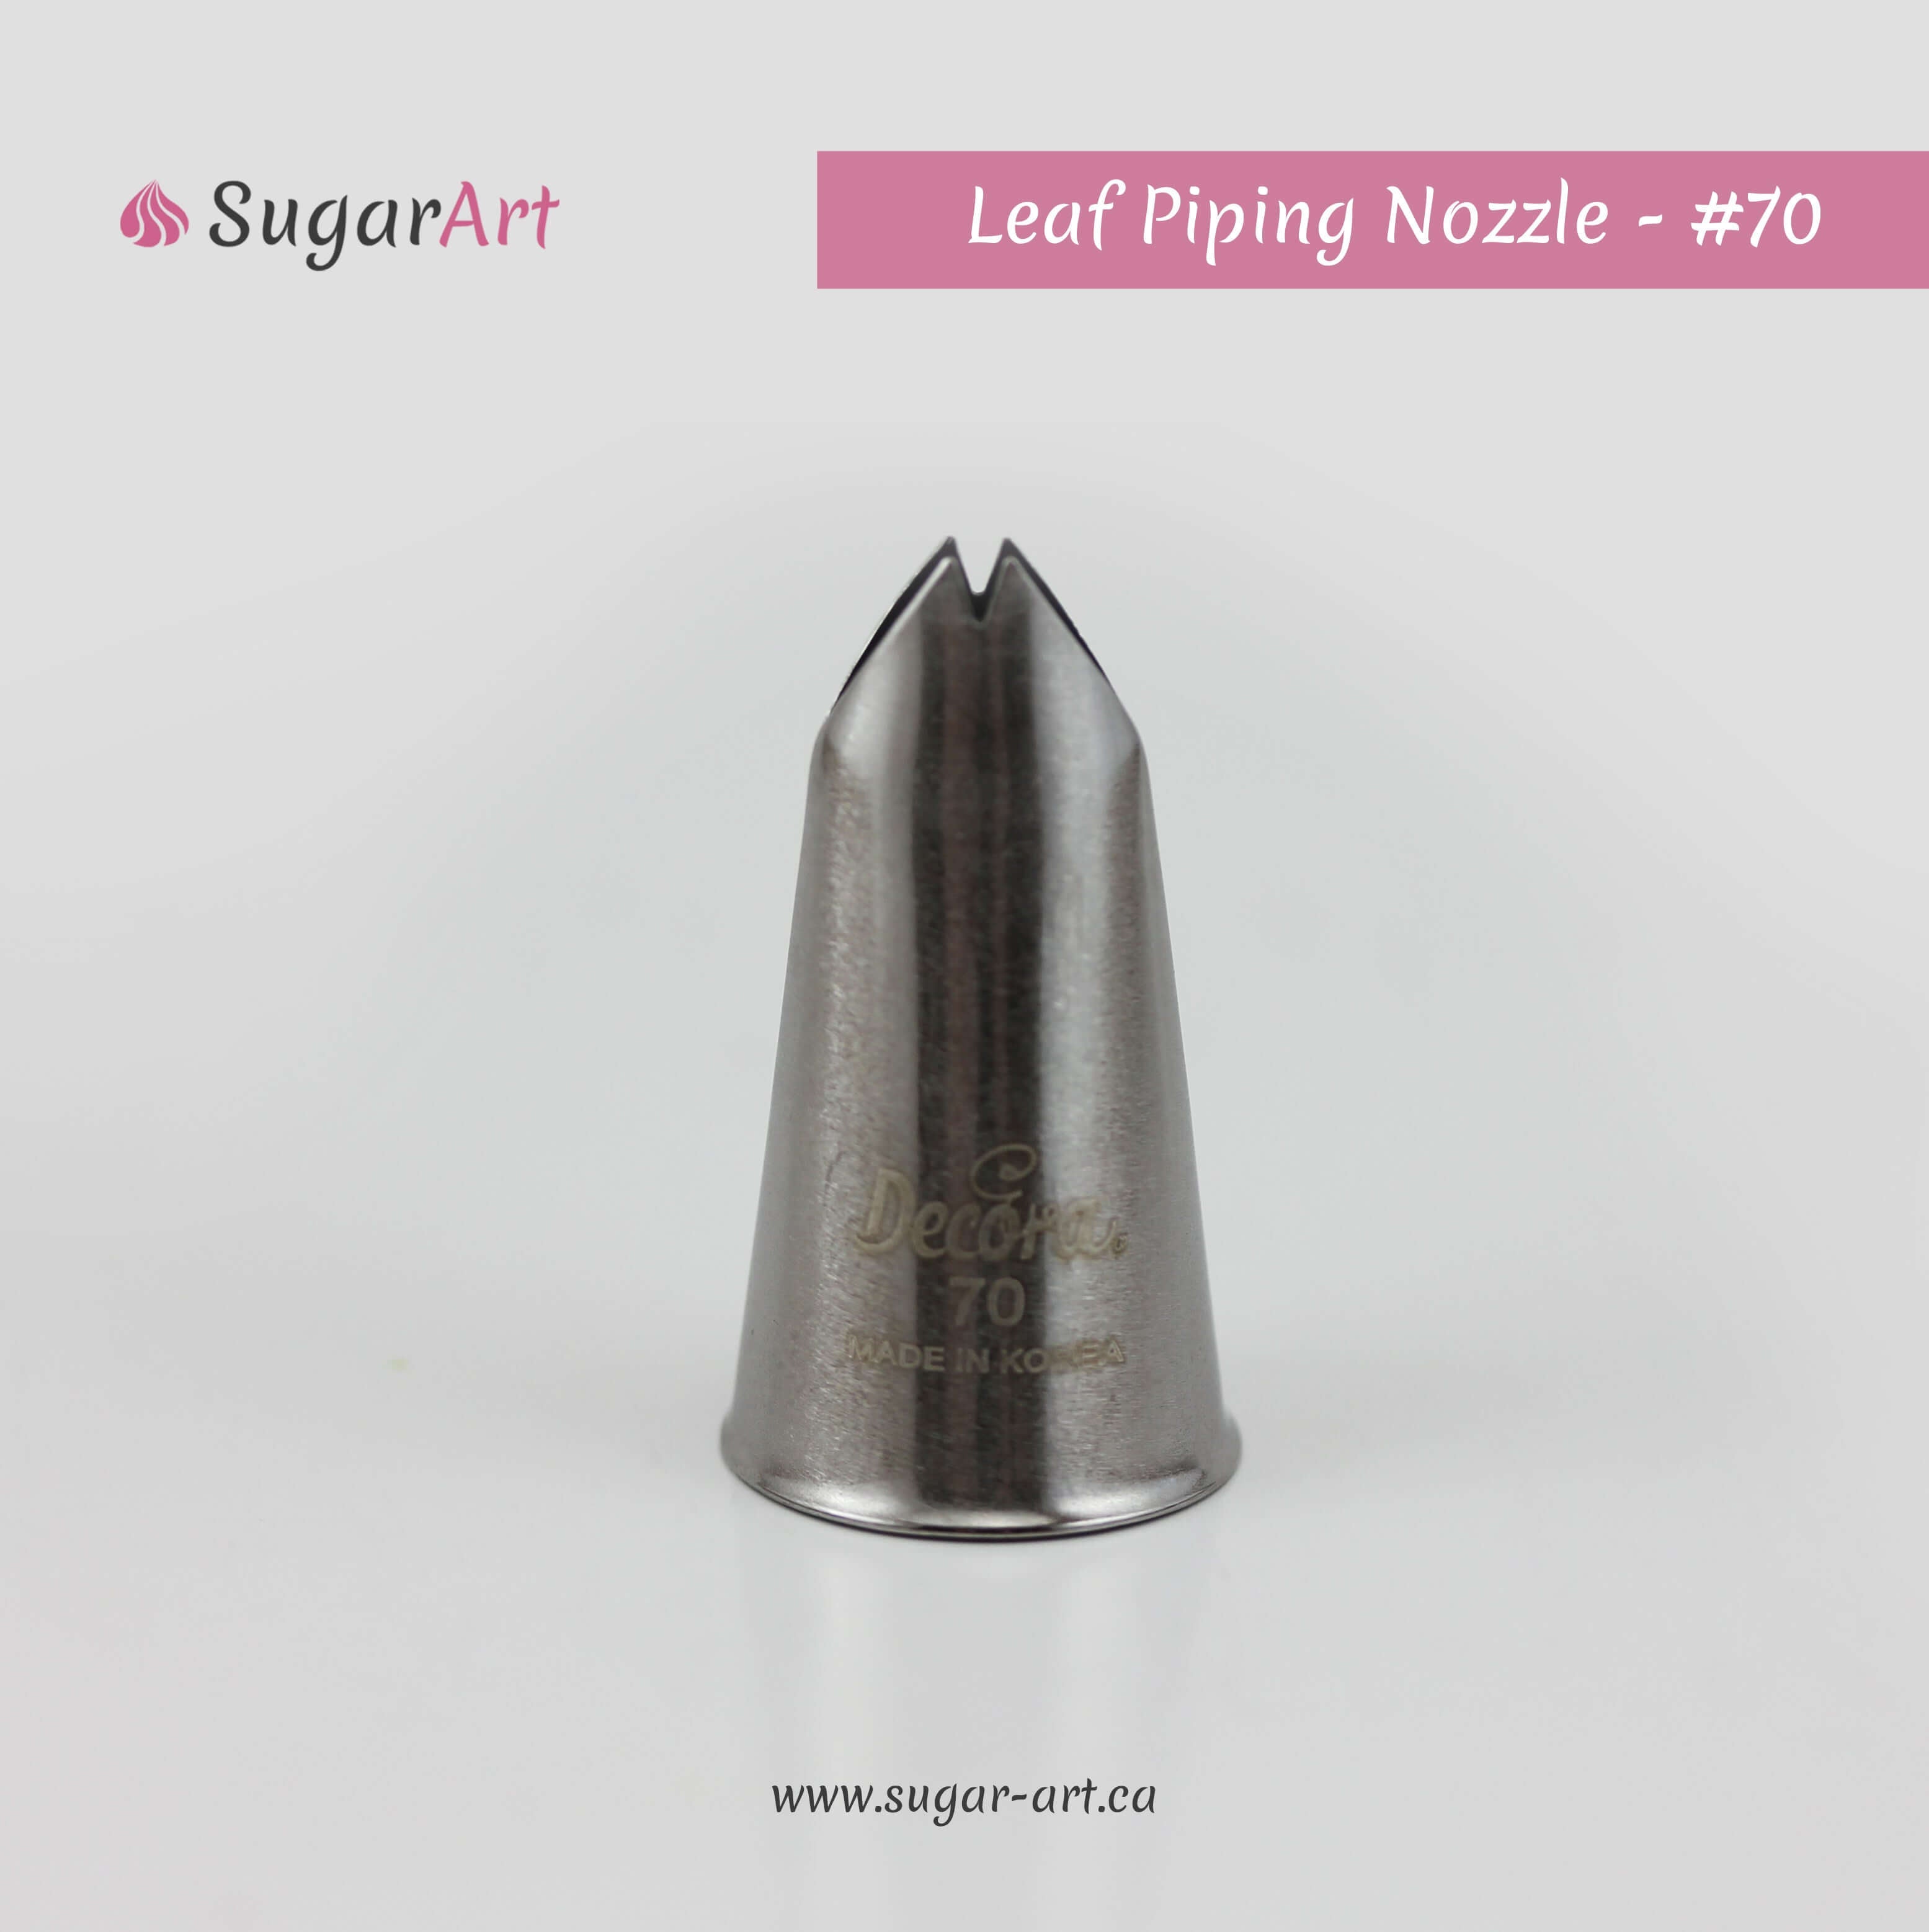 Leaf Piping Nozzle 70 - BSUPP010.